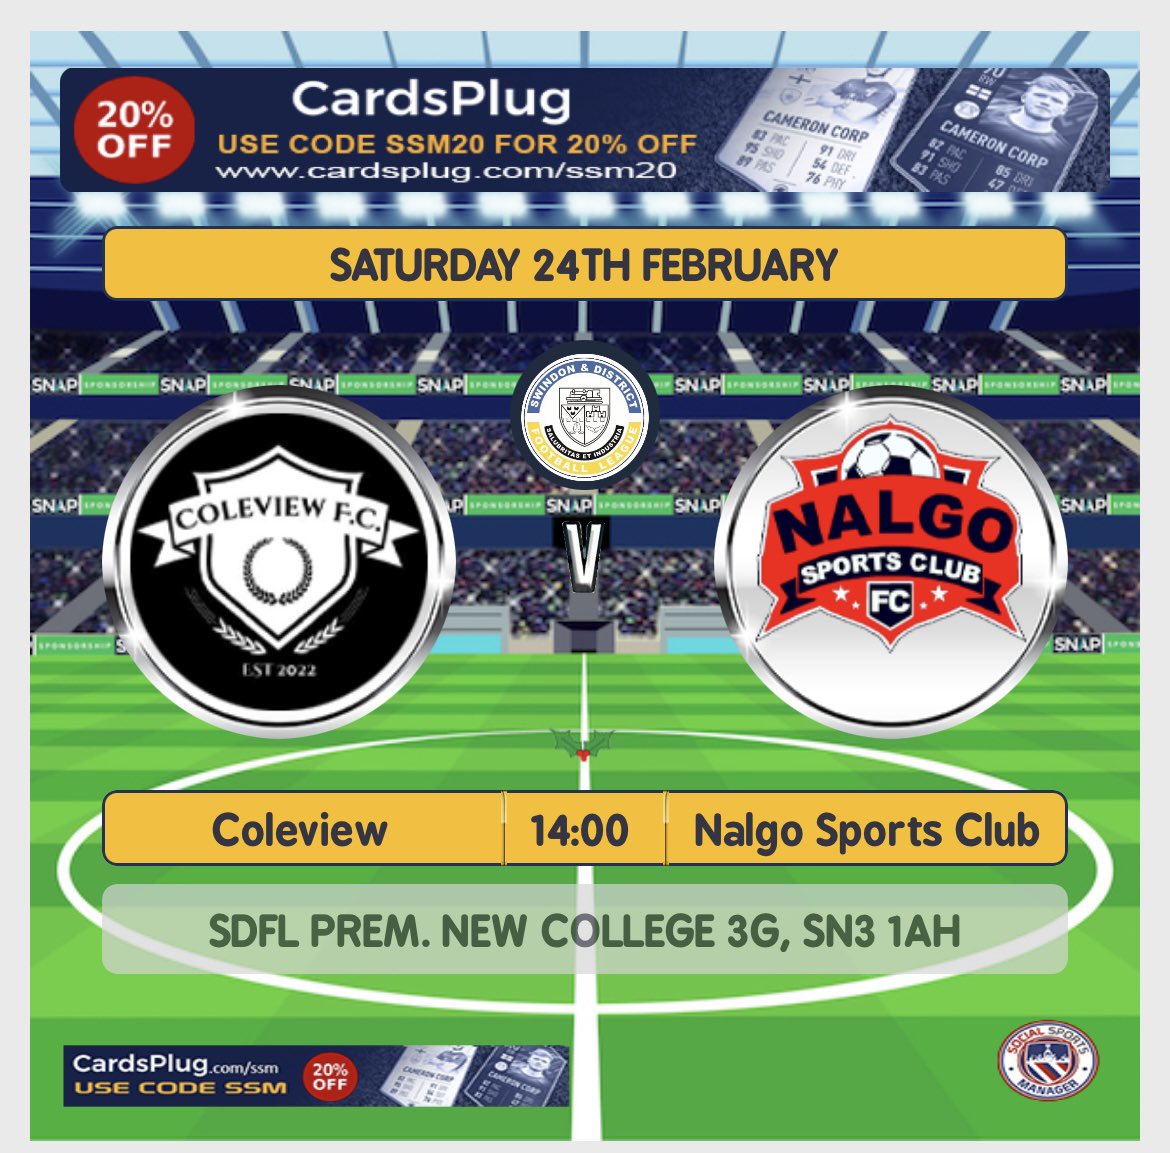 Next game👇🏼 Another clash with Nalgo this weekend. Just the single goal separated the two sides last week. In for another close game! UTC🟣⚫️